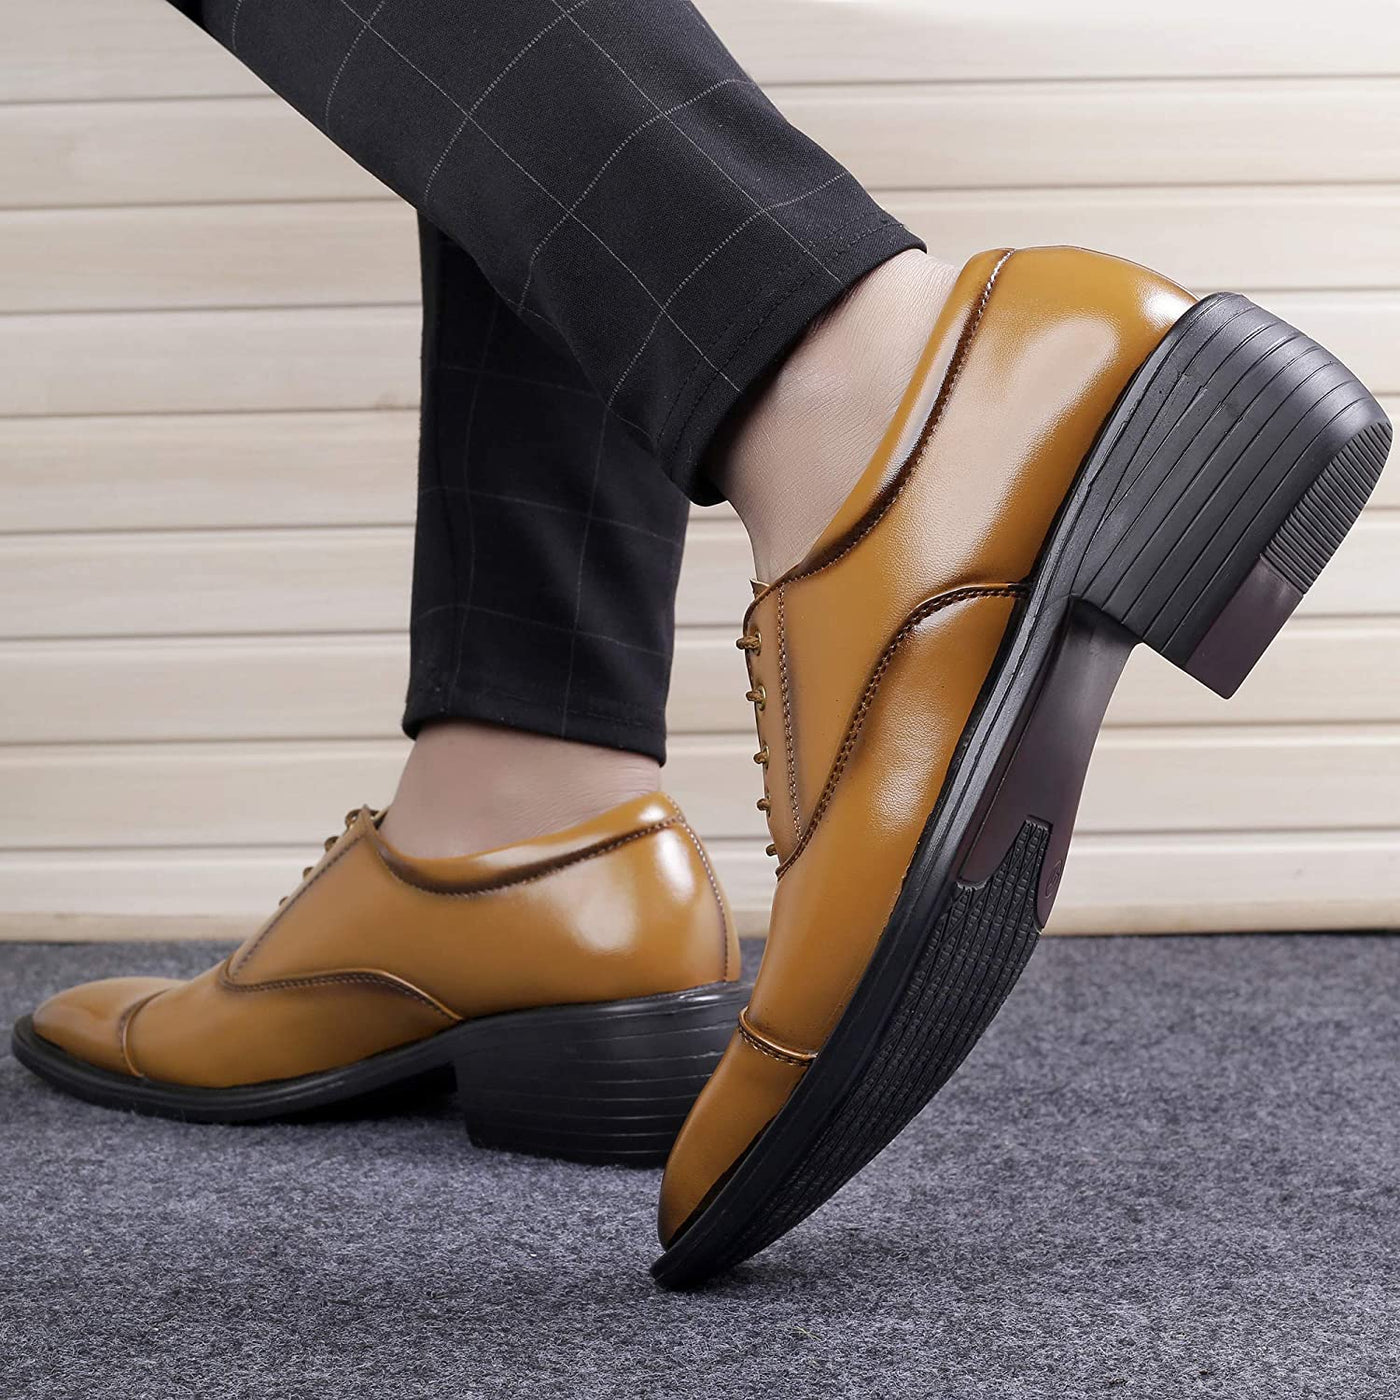 Fashionable Tan Casual And Formal Office Wear Lace-Up Shoes-Unique and Classy